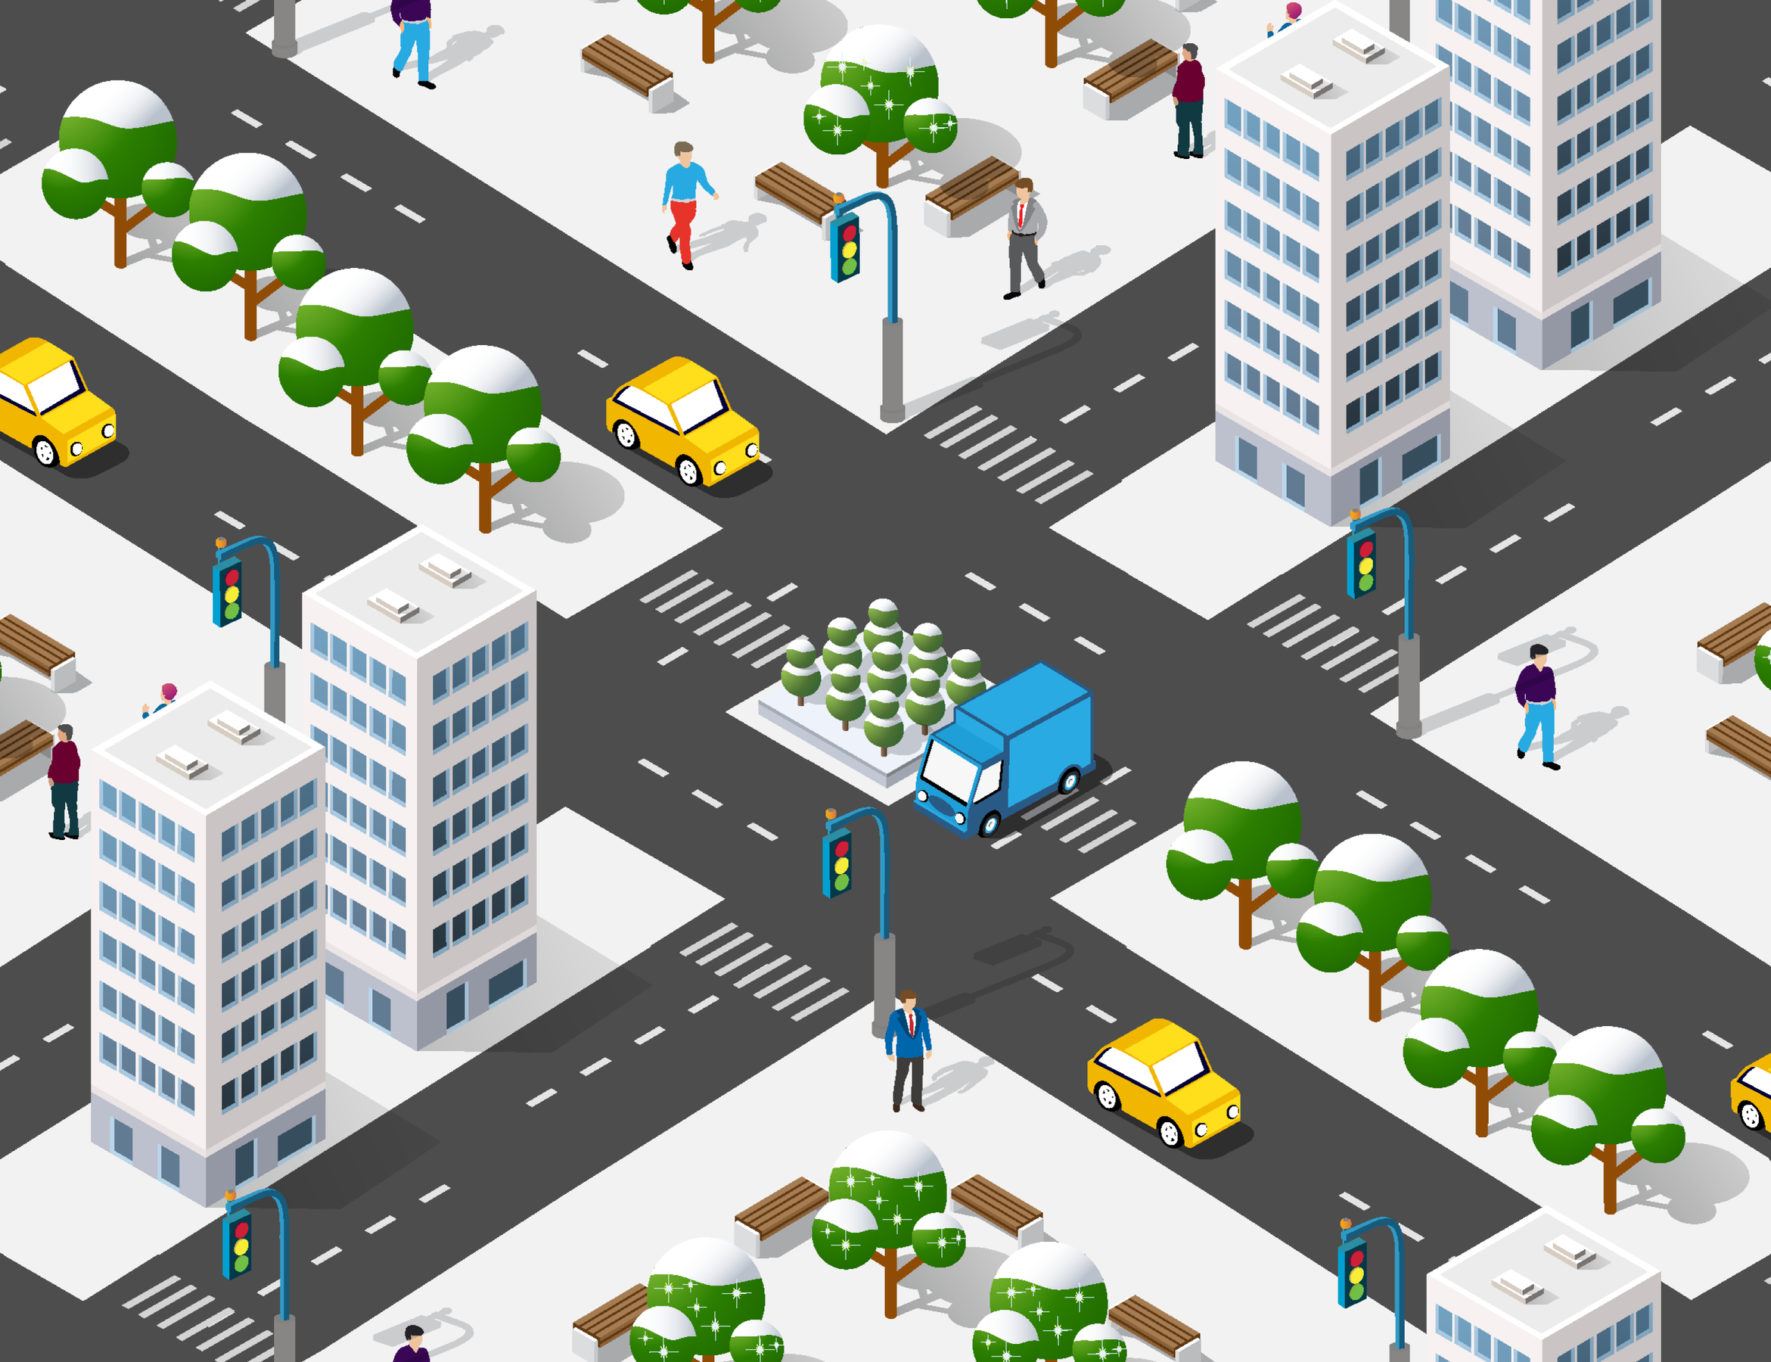 10 proposals for more sustainable mobility